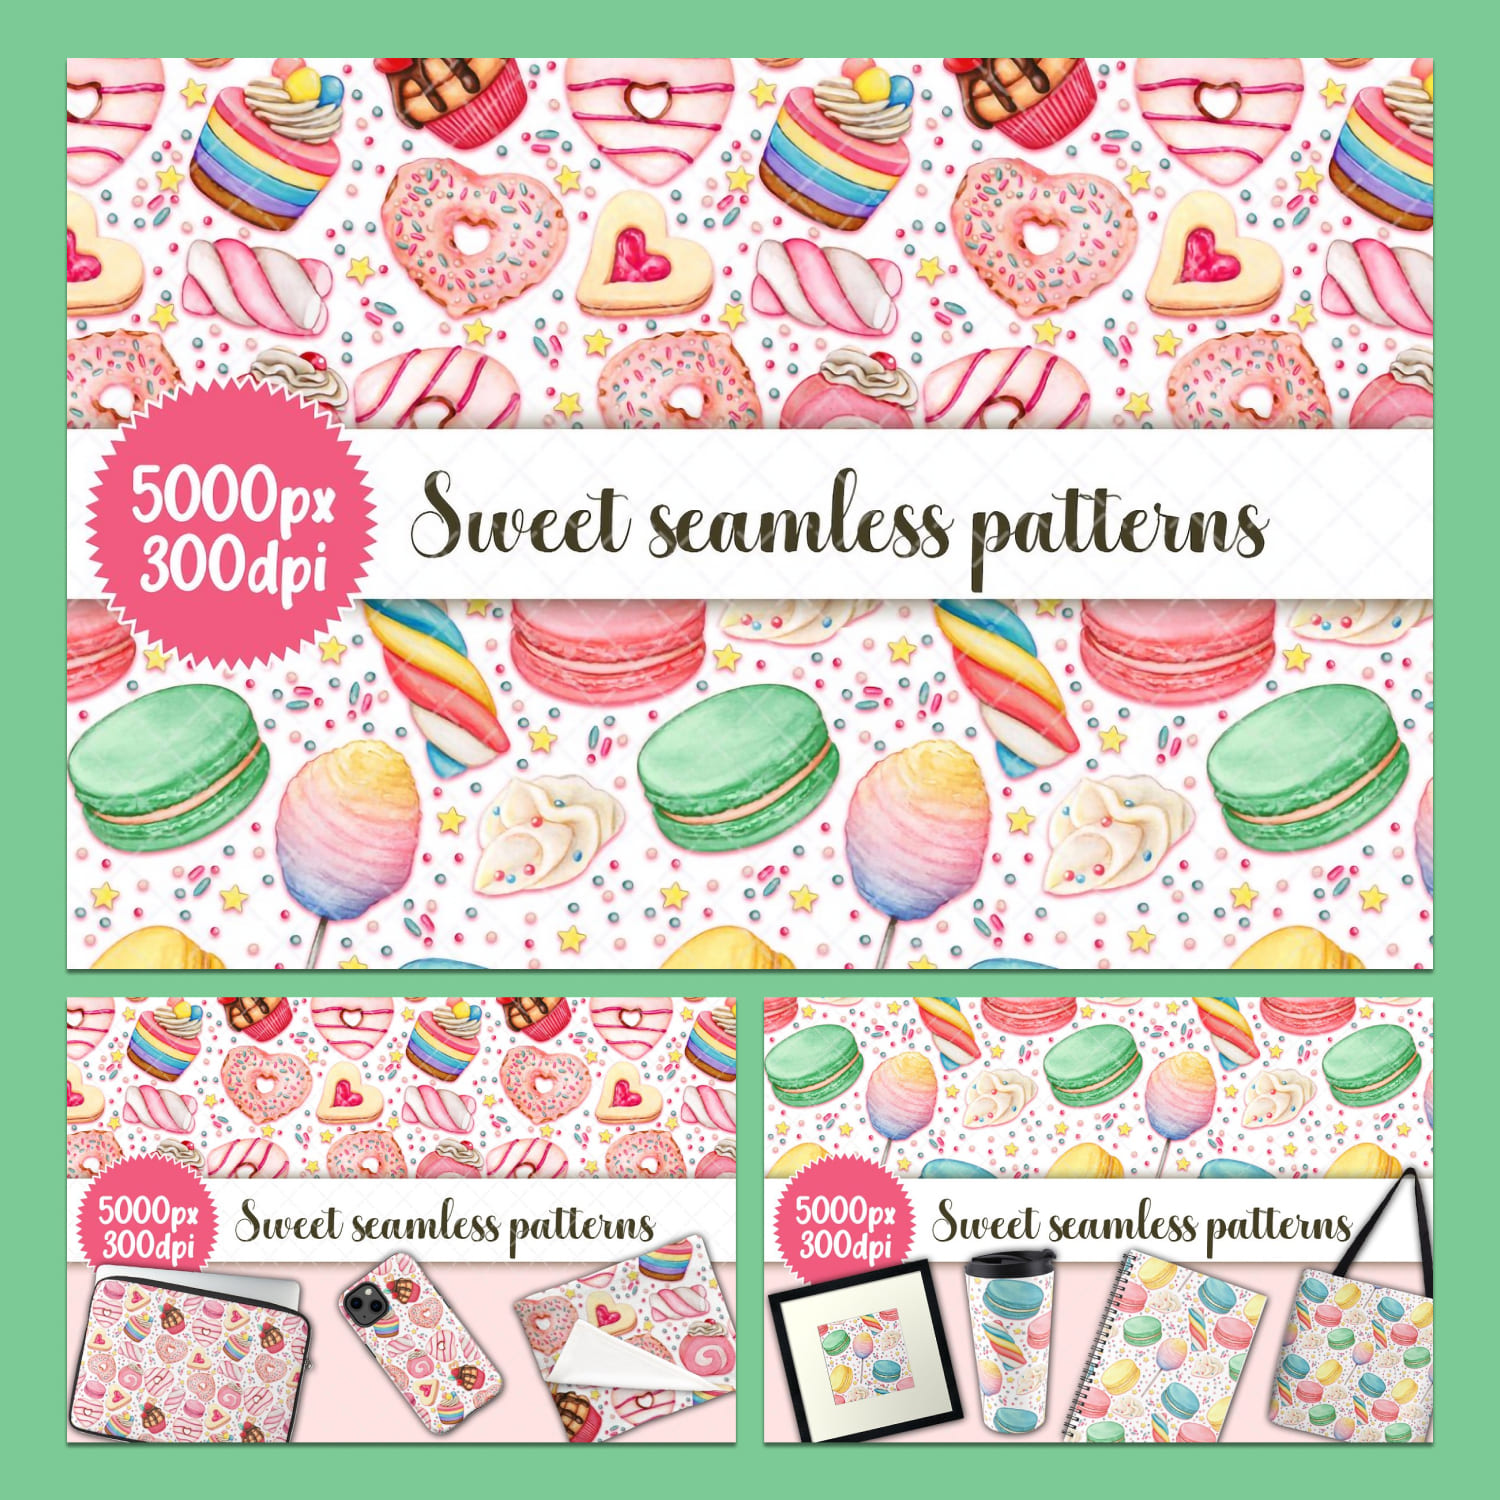 2 candies and treats patterns cover.